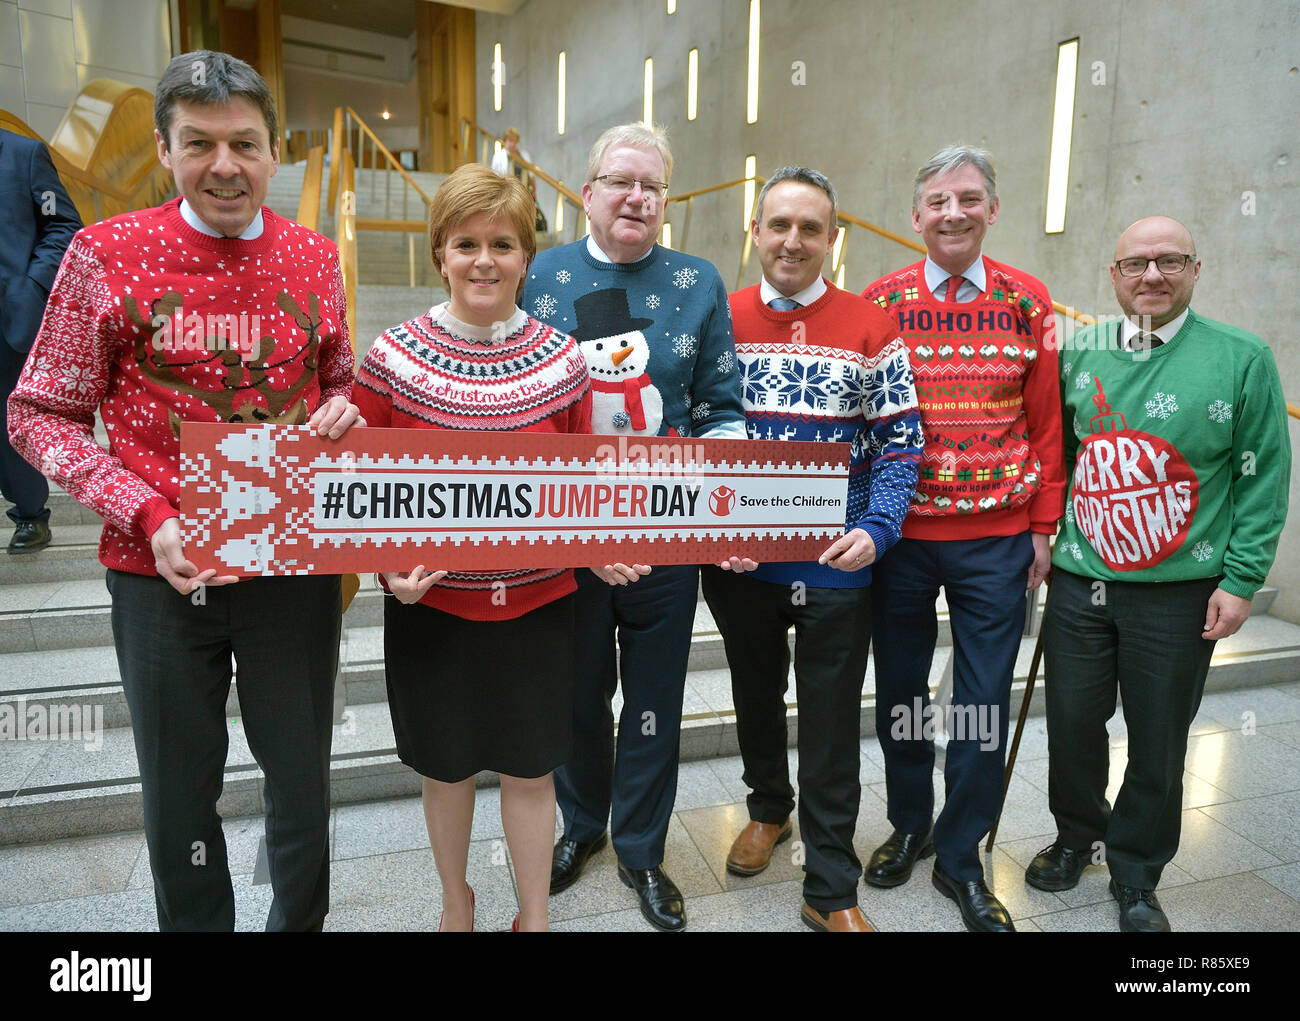 https://c8.alamy.com/comp/R85XE9/save-the-childrens-christmas-jumper-day-2018-pictured-l-r-at-the-scottish-parliament-with-their-christmas-jumpers-on-are-ken-macintosh-msp-presiding-officer-of-the-scottish-parliament-first-minister-nicola-sturgeon-snp-jackson-carlaw-scottish-conservative-deputy-leader-alex-cole-hamilton-msp-liberal-democrat-richard-leonard-leader-scottish-labour-party-and-patrick-harvie-co-convener-of-the-scottish-green-party-R85XE9.jpg